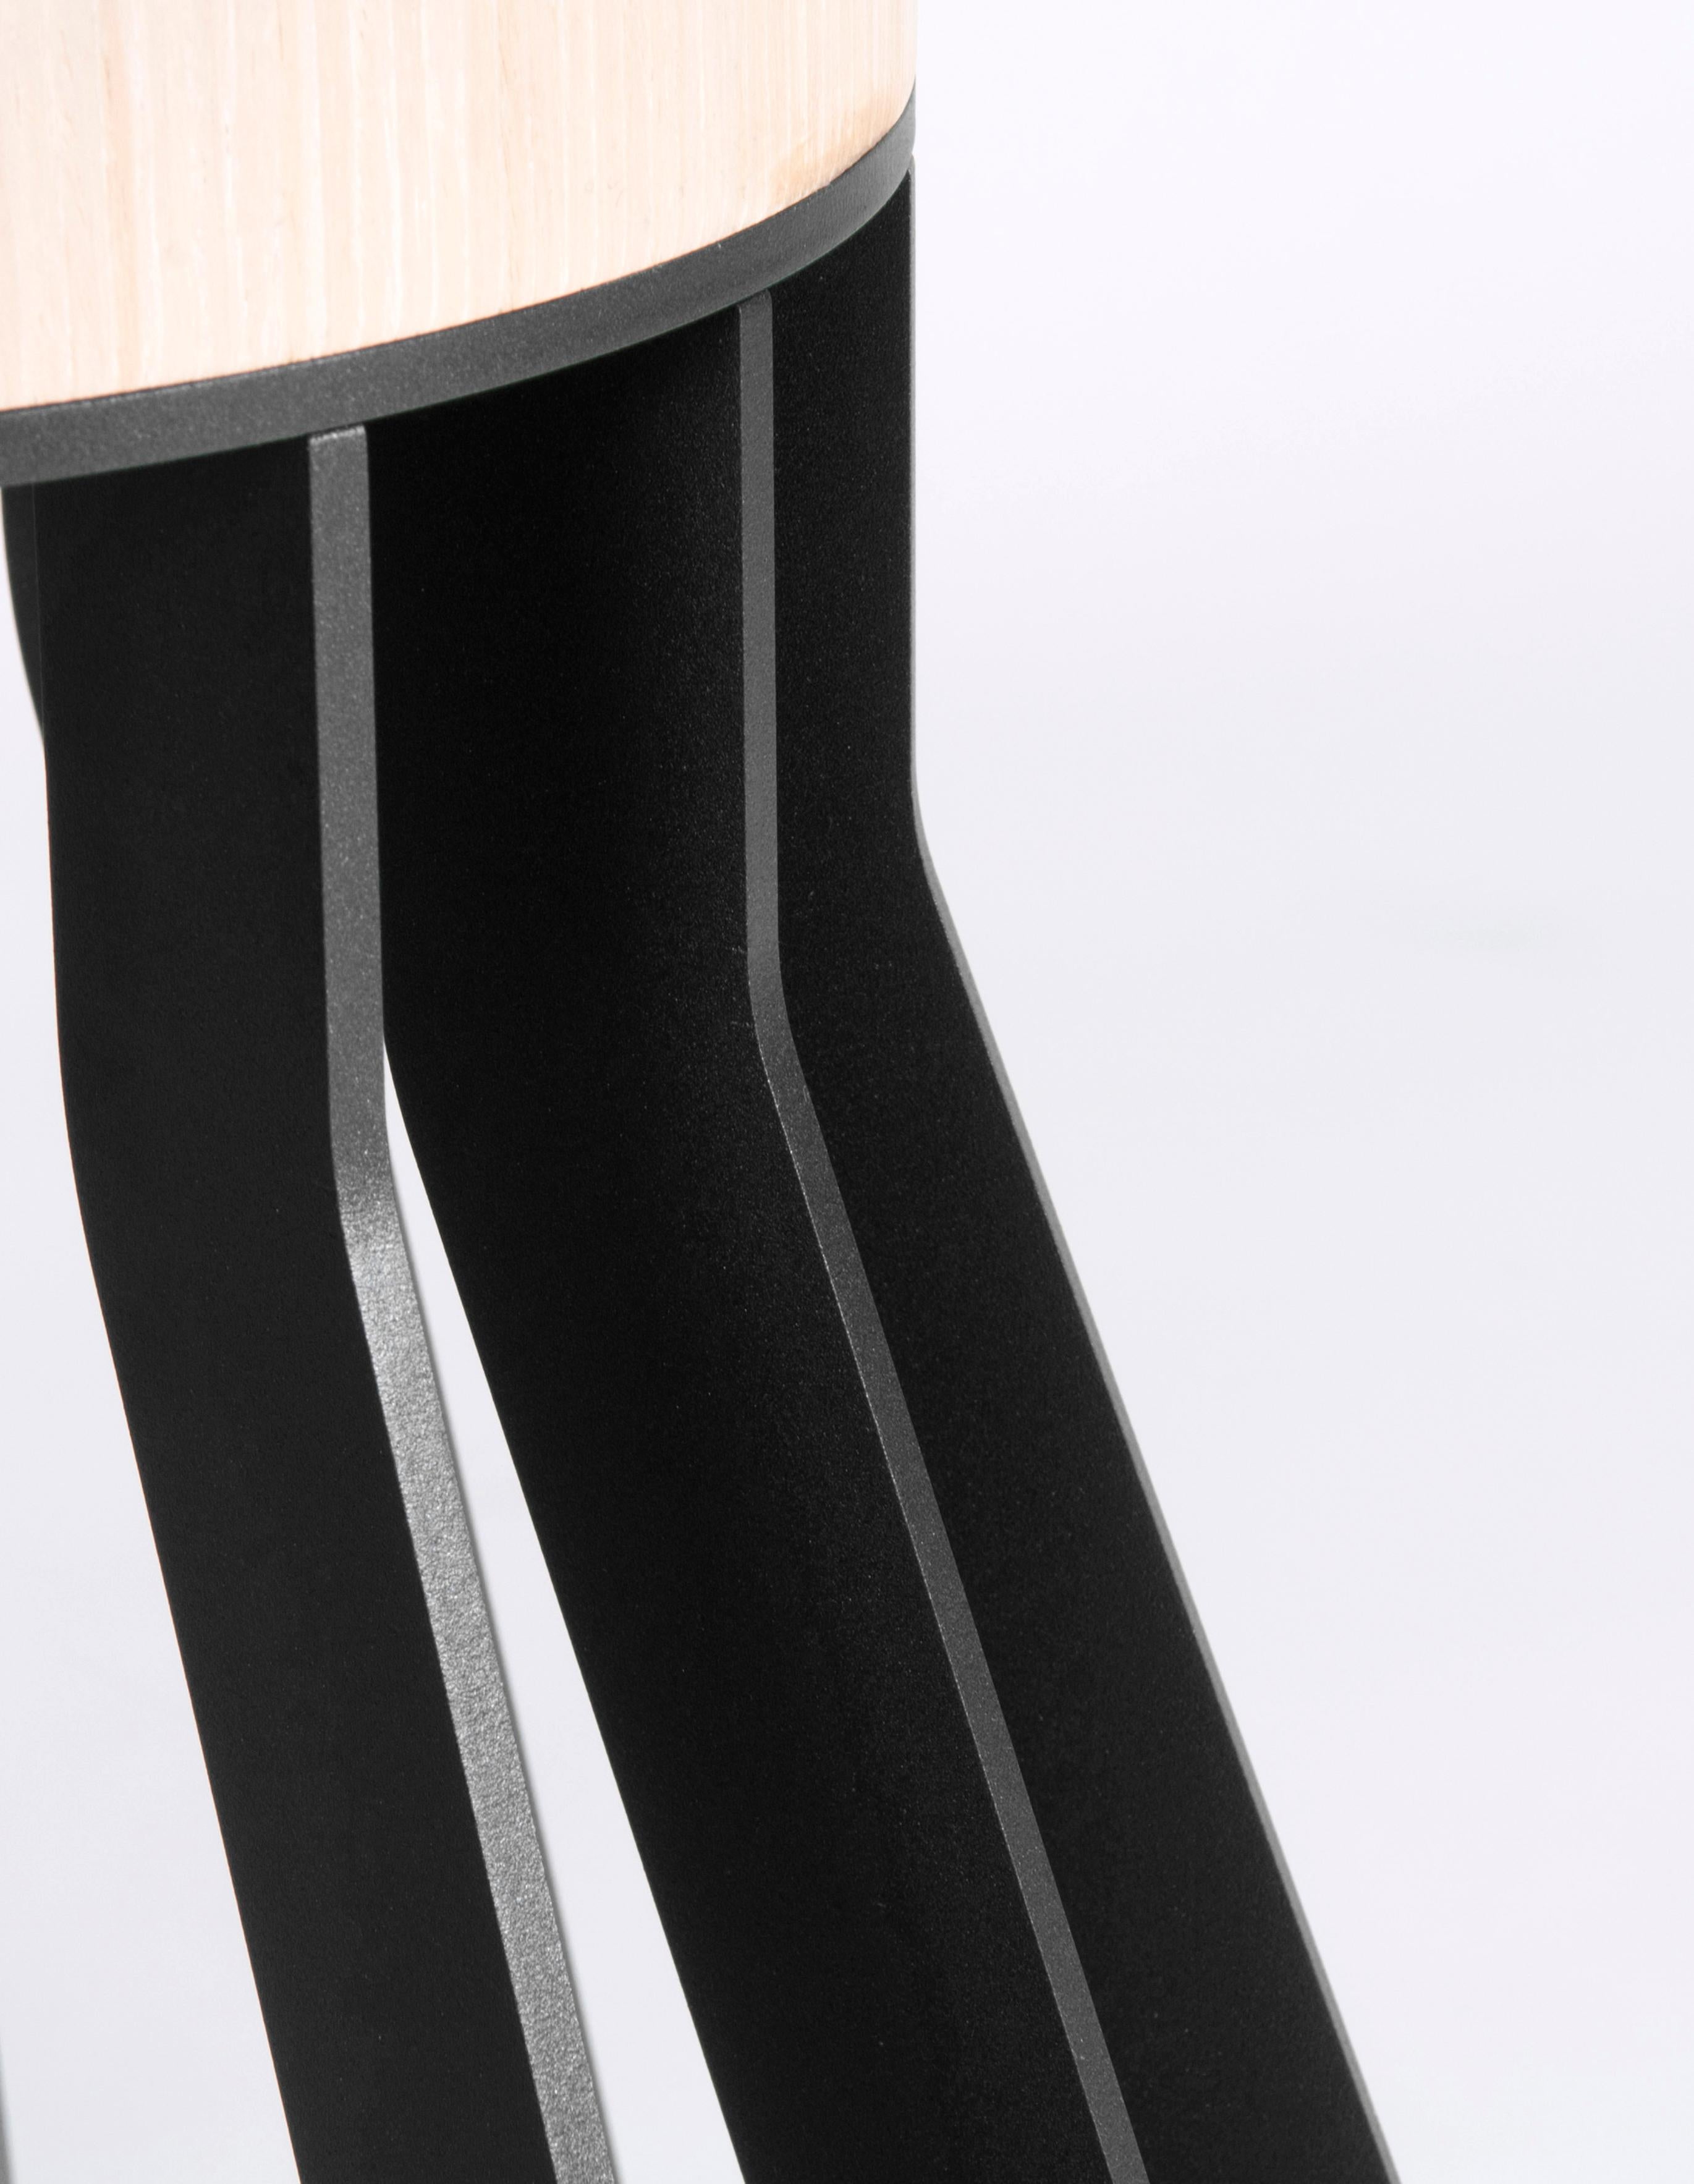 Contemporary Mewoma Dining Table, Black Legs White Top by Jonah Takagi for La Chance For Sale